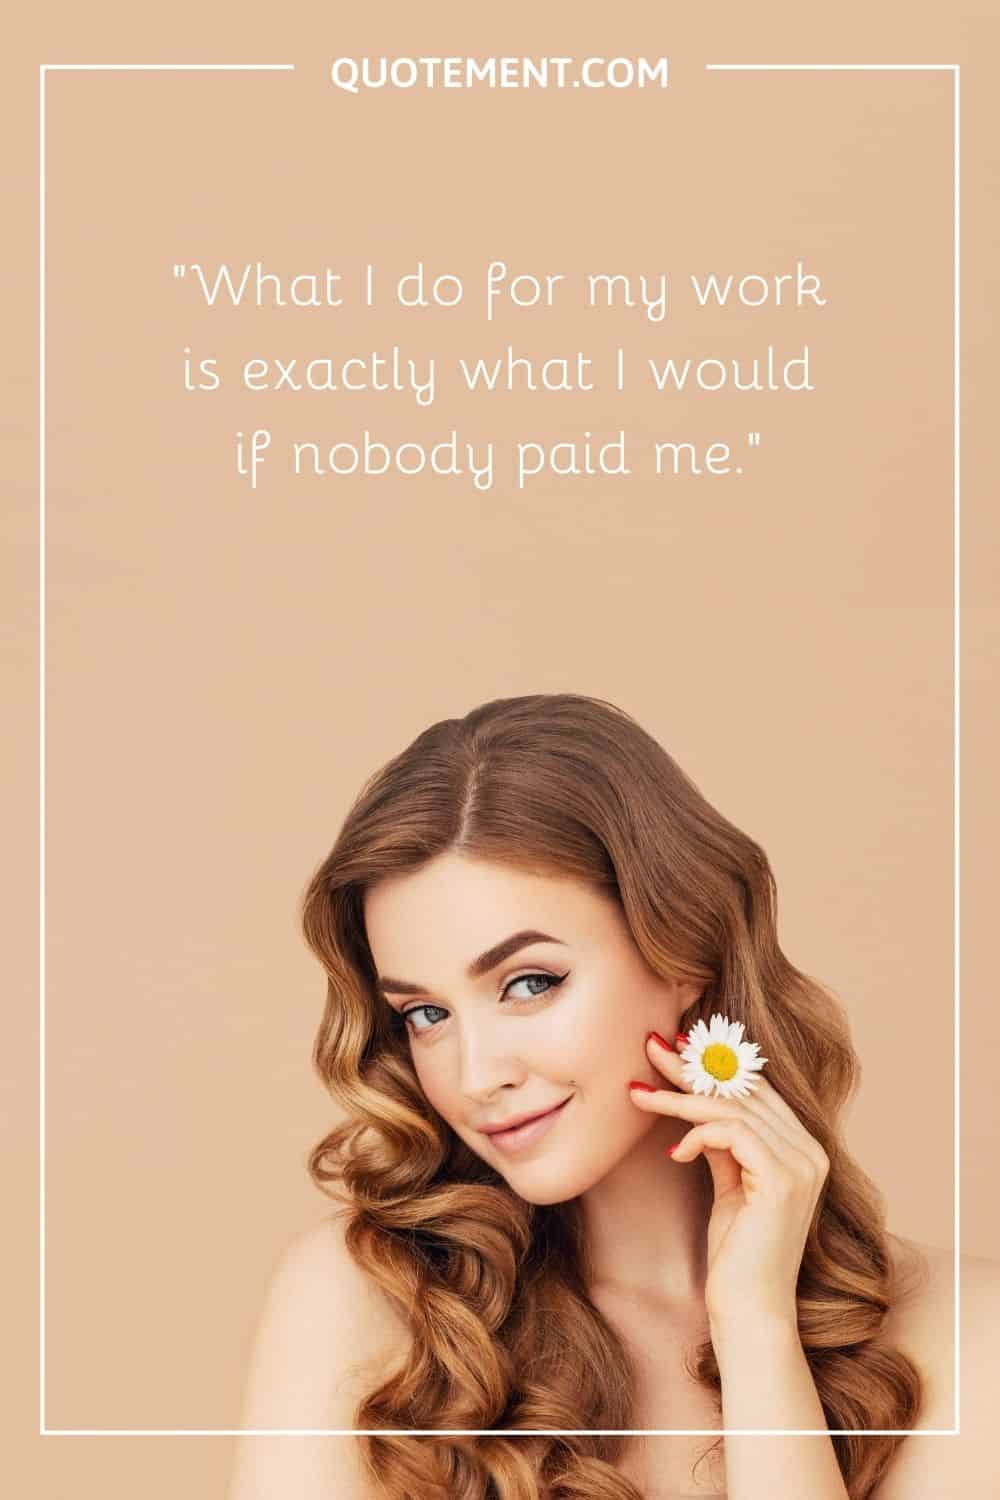 What I do for my work is exactly what I would if nobody paid me.